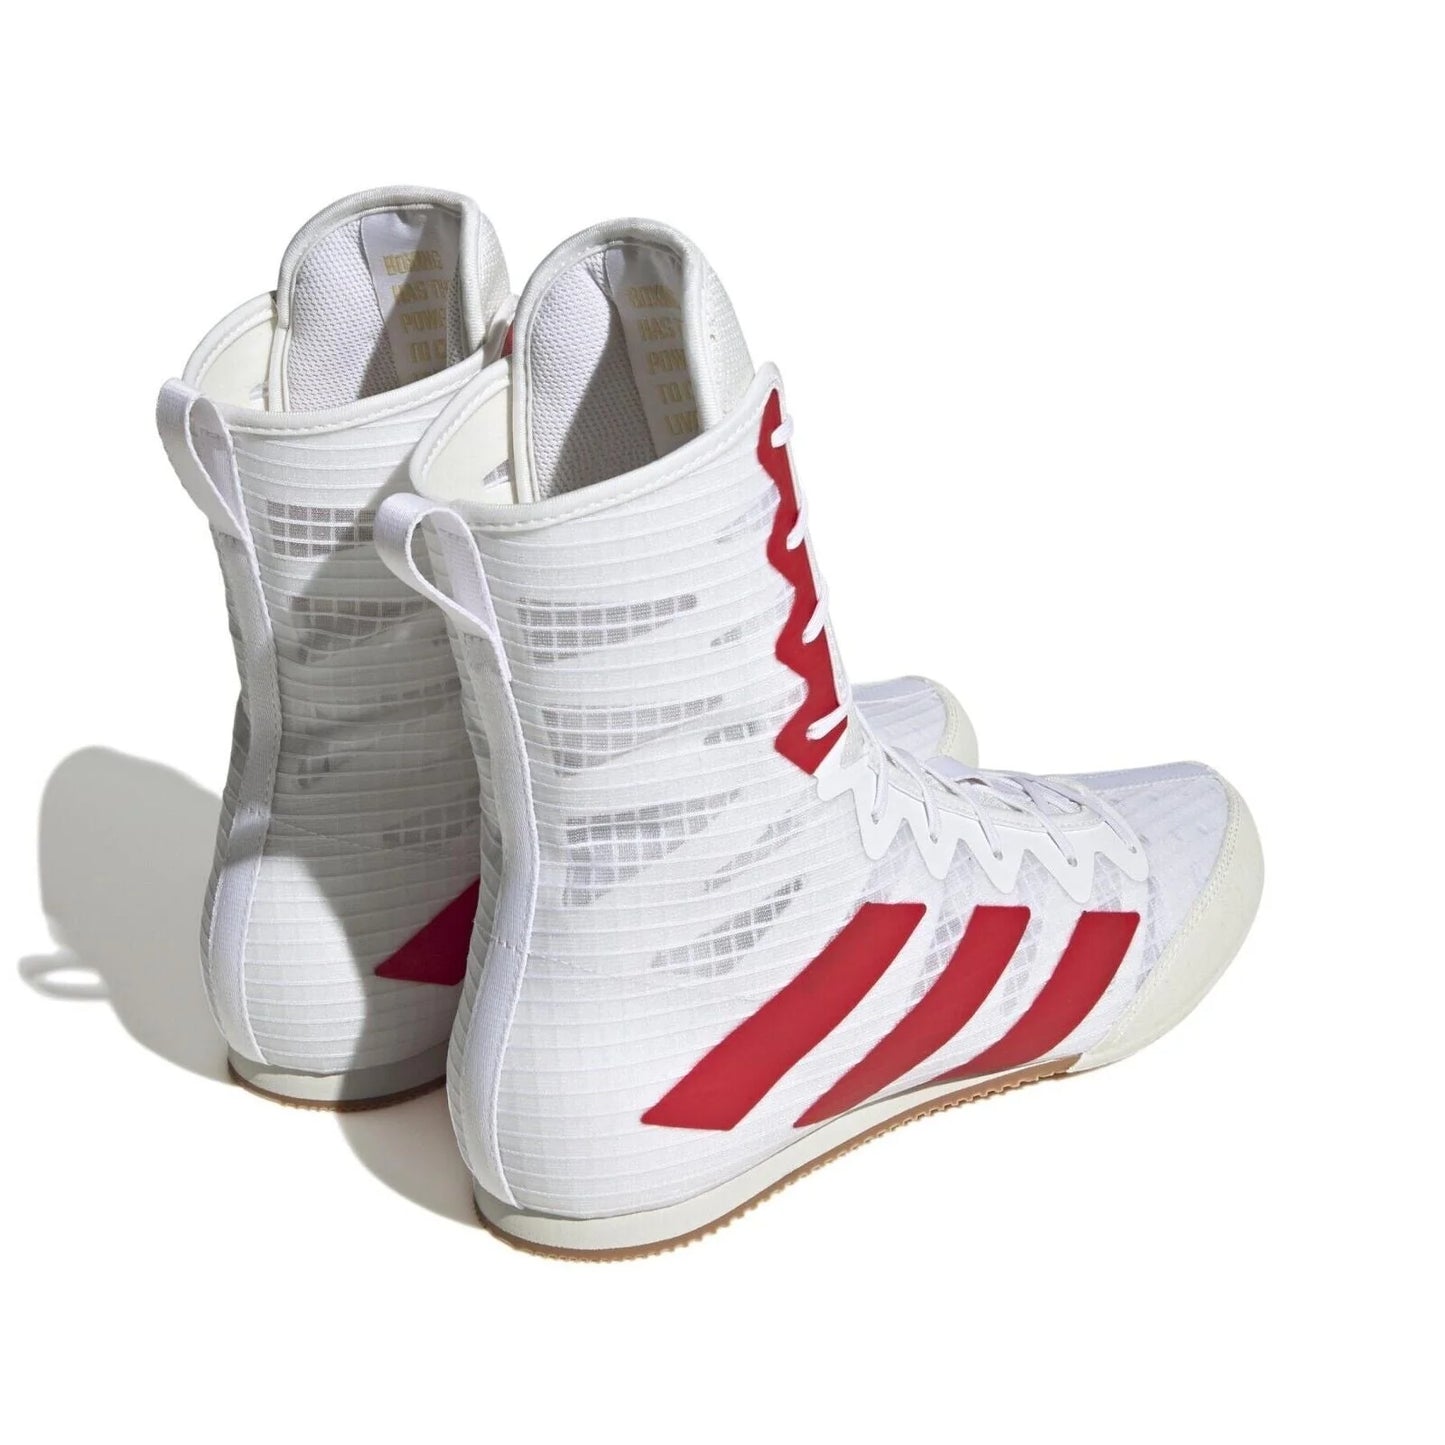 Hp9613 Adidas Boxing Boots Box Hog 4 White Red 04